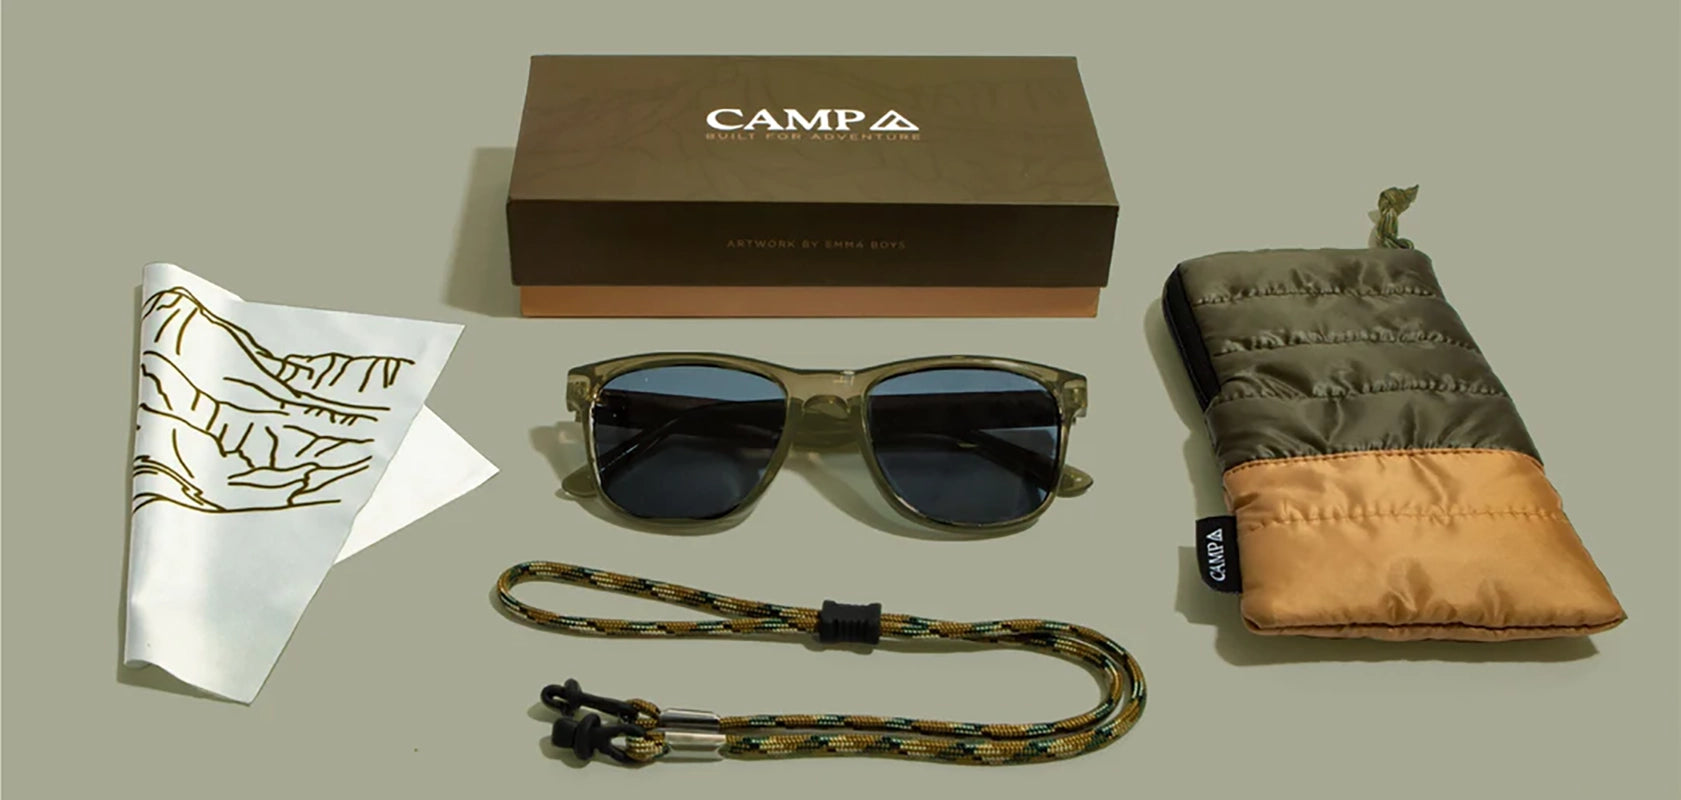 Camp Trail Limited edition Glacier Packaging that includes: Box, Graphic cleaning cloth, pouch and glasses tether